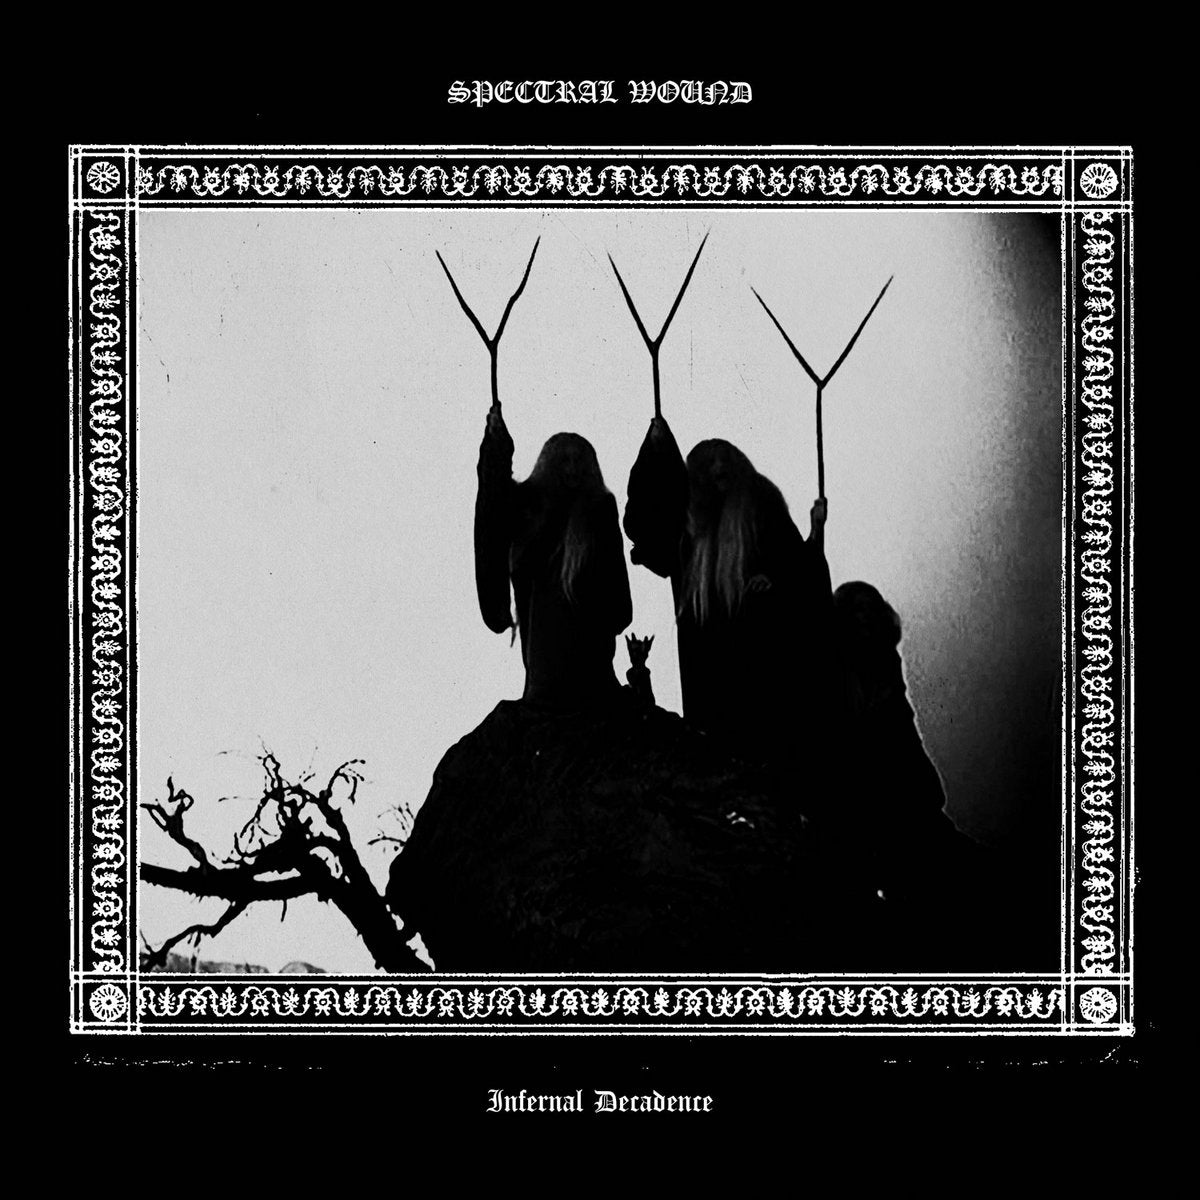 SPECTRAL WOUND "Infernal Decadence (Deluxe)" LP